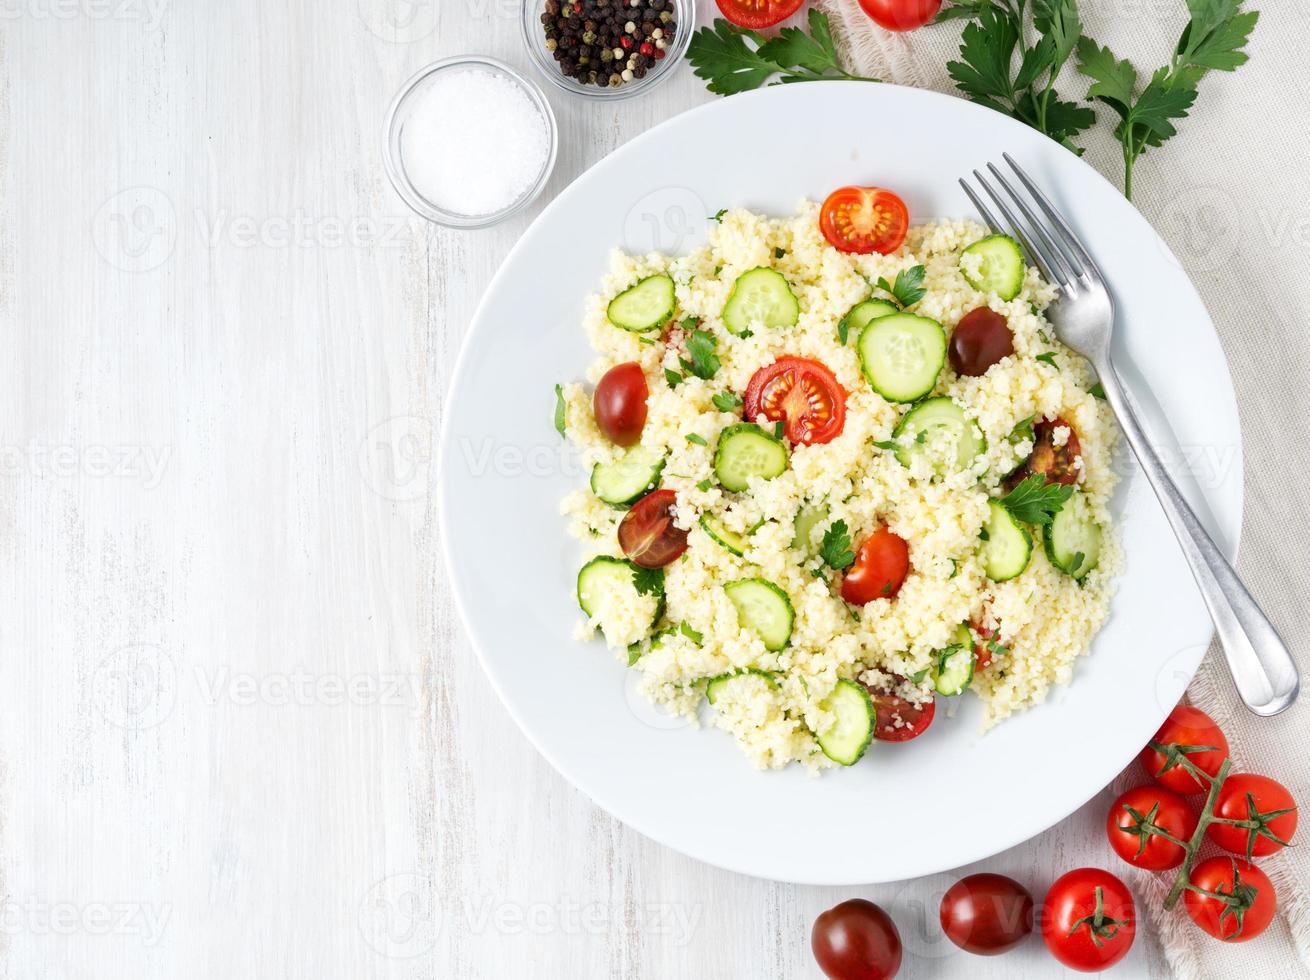 fresh diet vegetable salad with couscous, tomatoes, cucumbers, parsley, white wooden table, top view, copy space photo